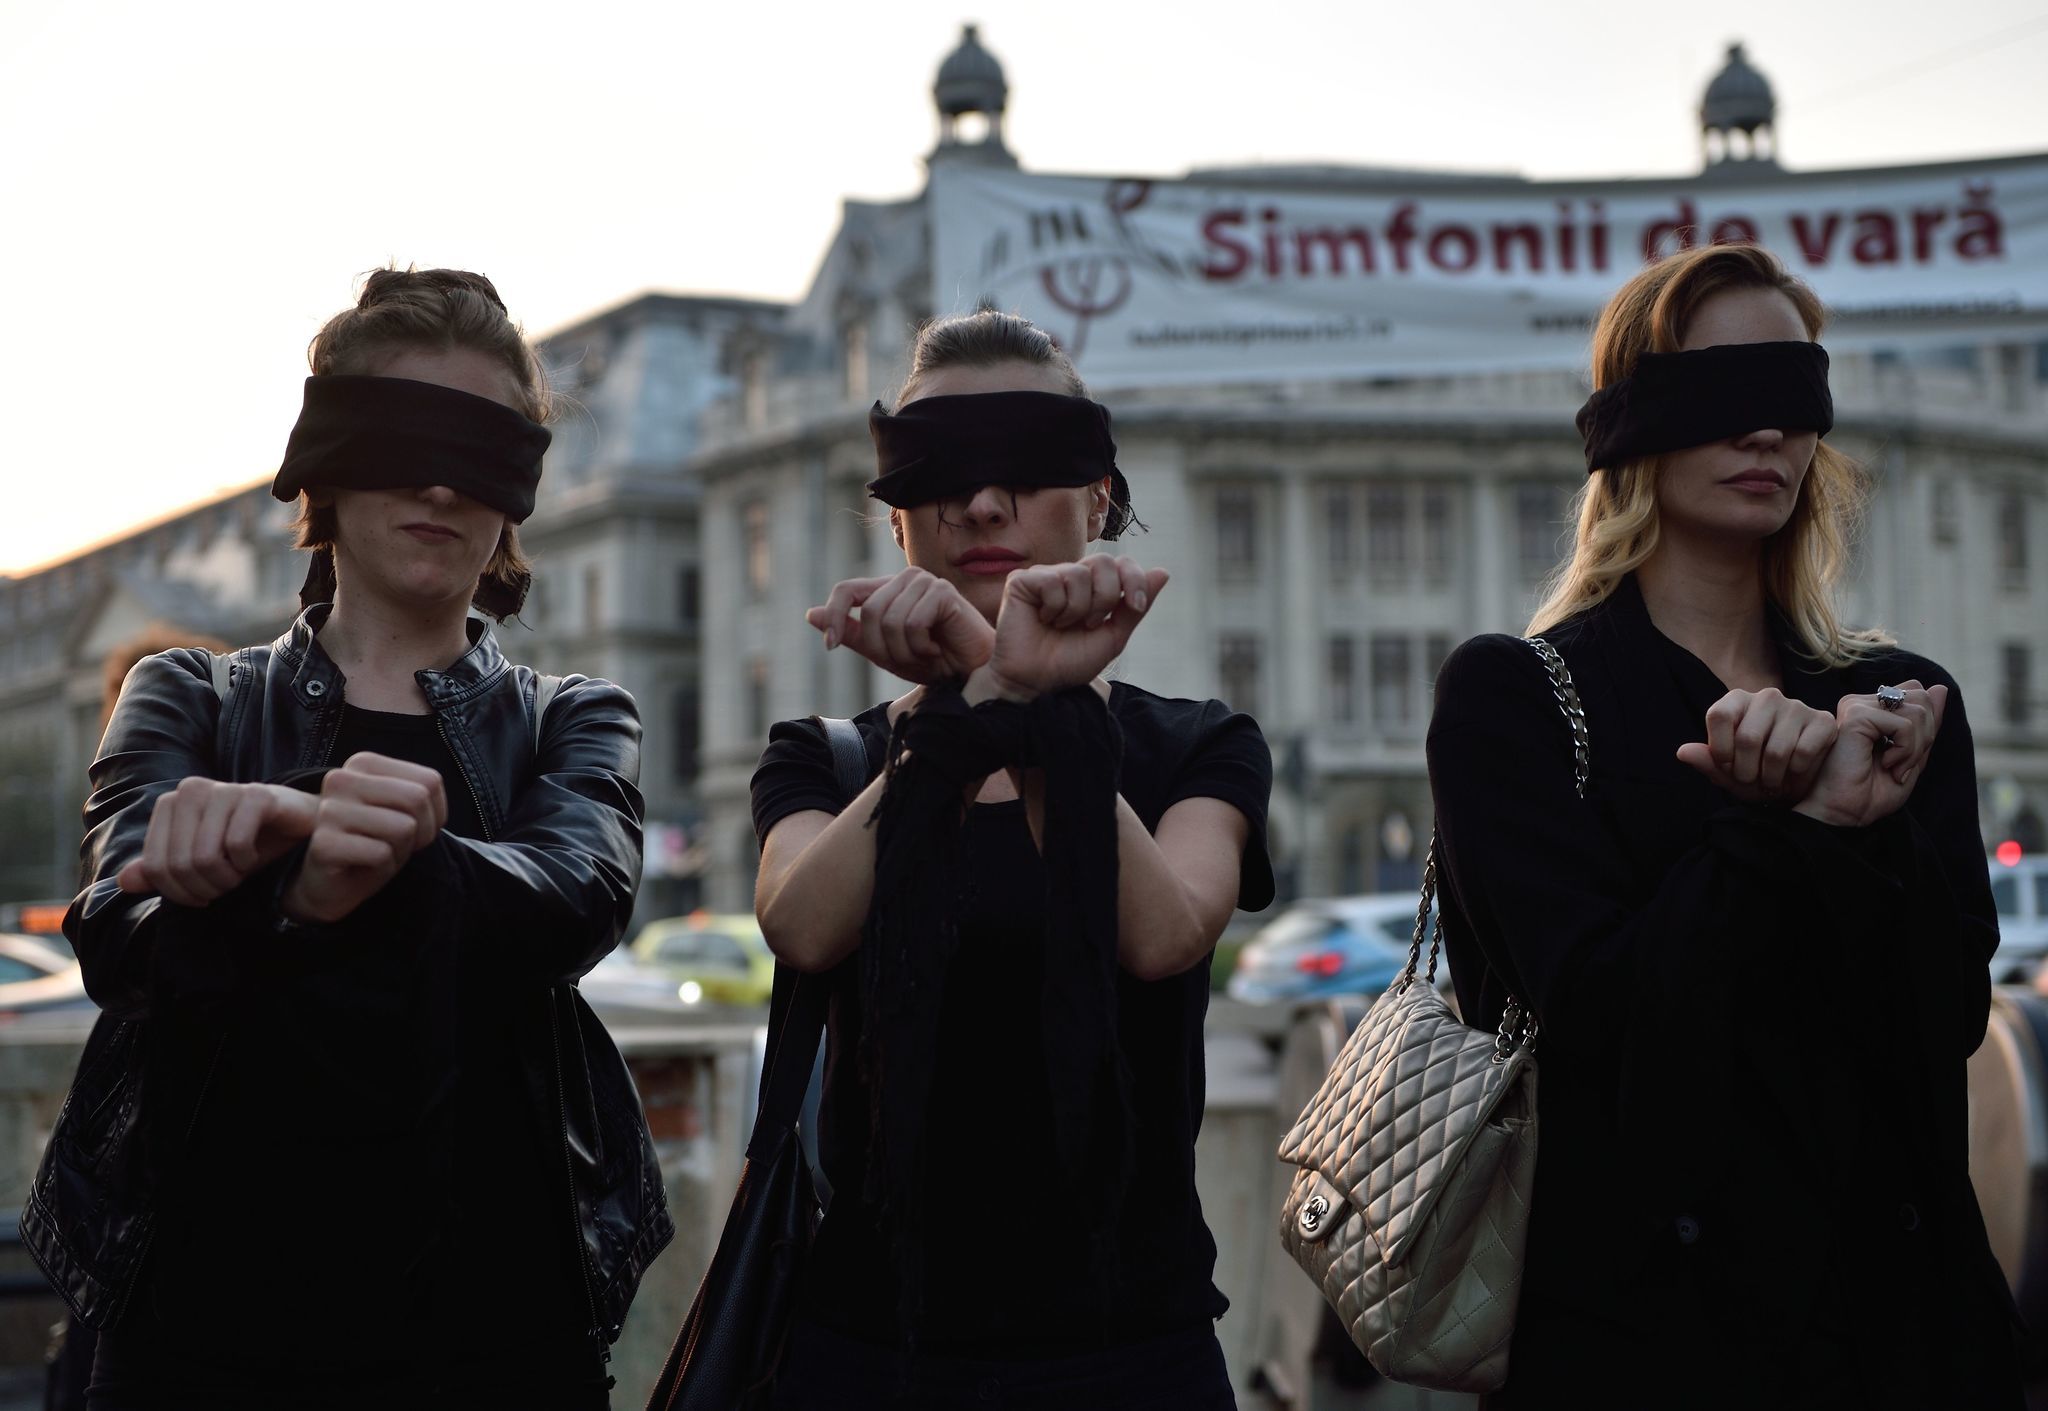 Romanian women in Bucharest show solidarity with Polish women protesting a proposed abortion law in Poland.